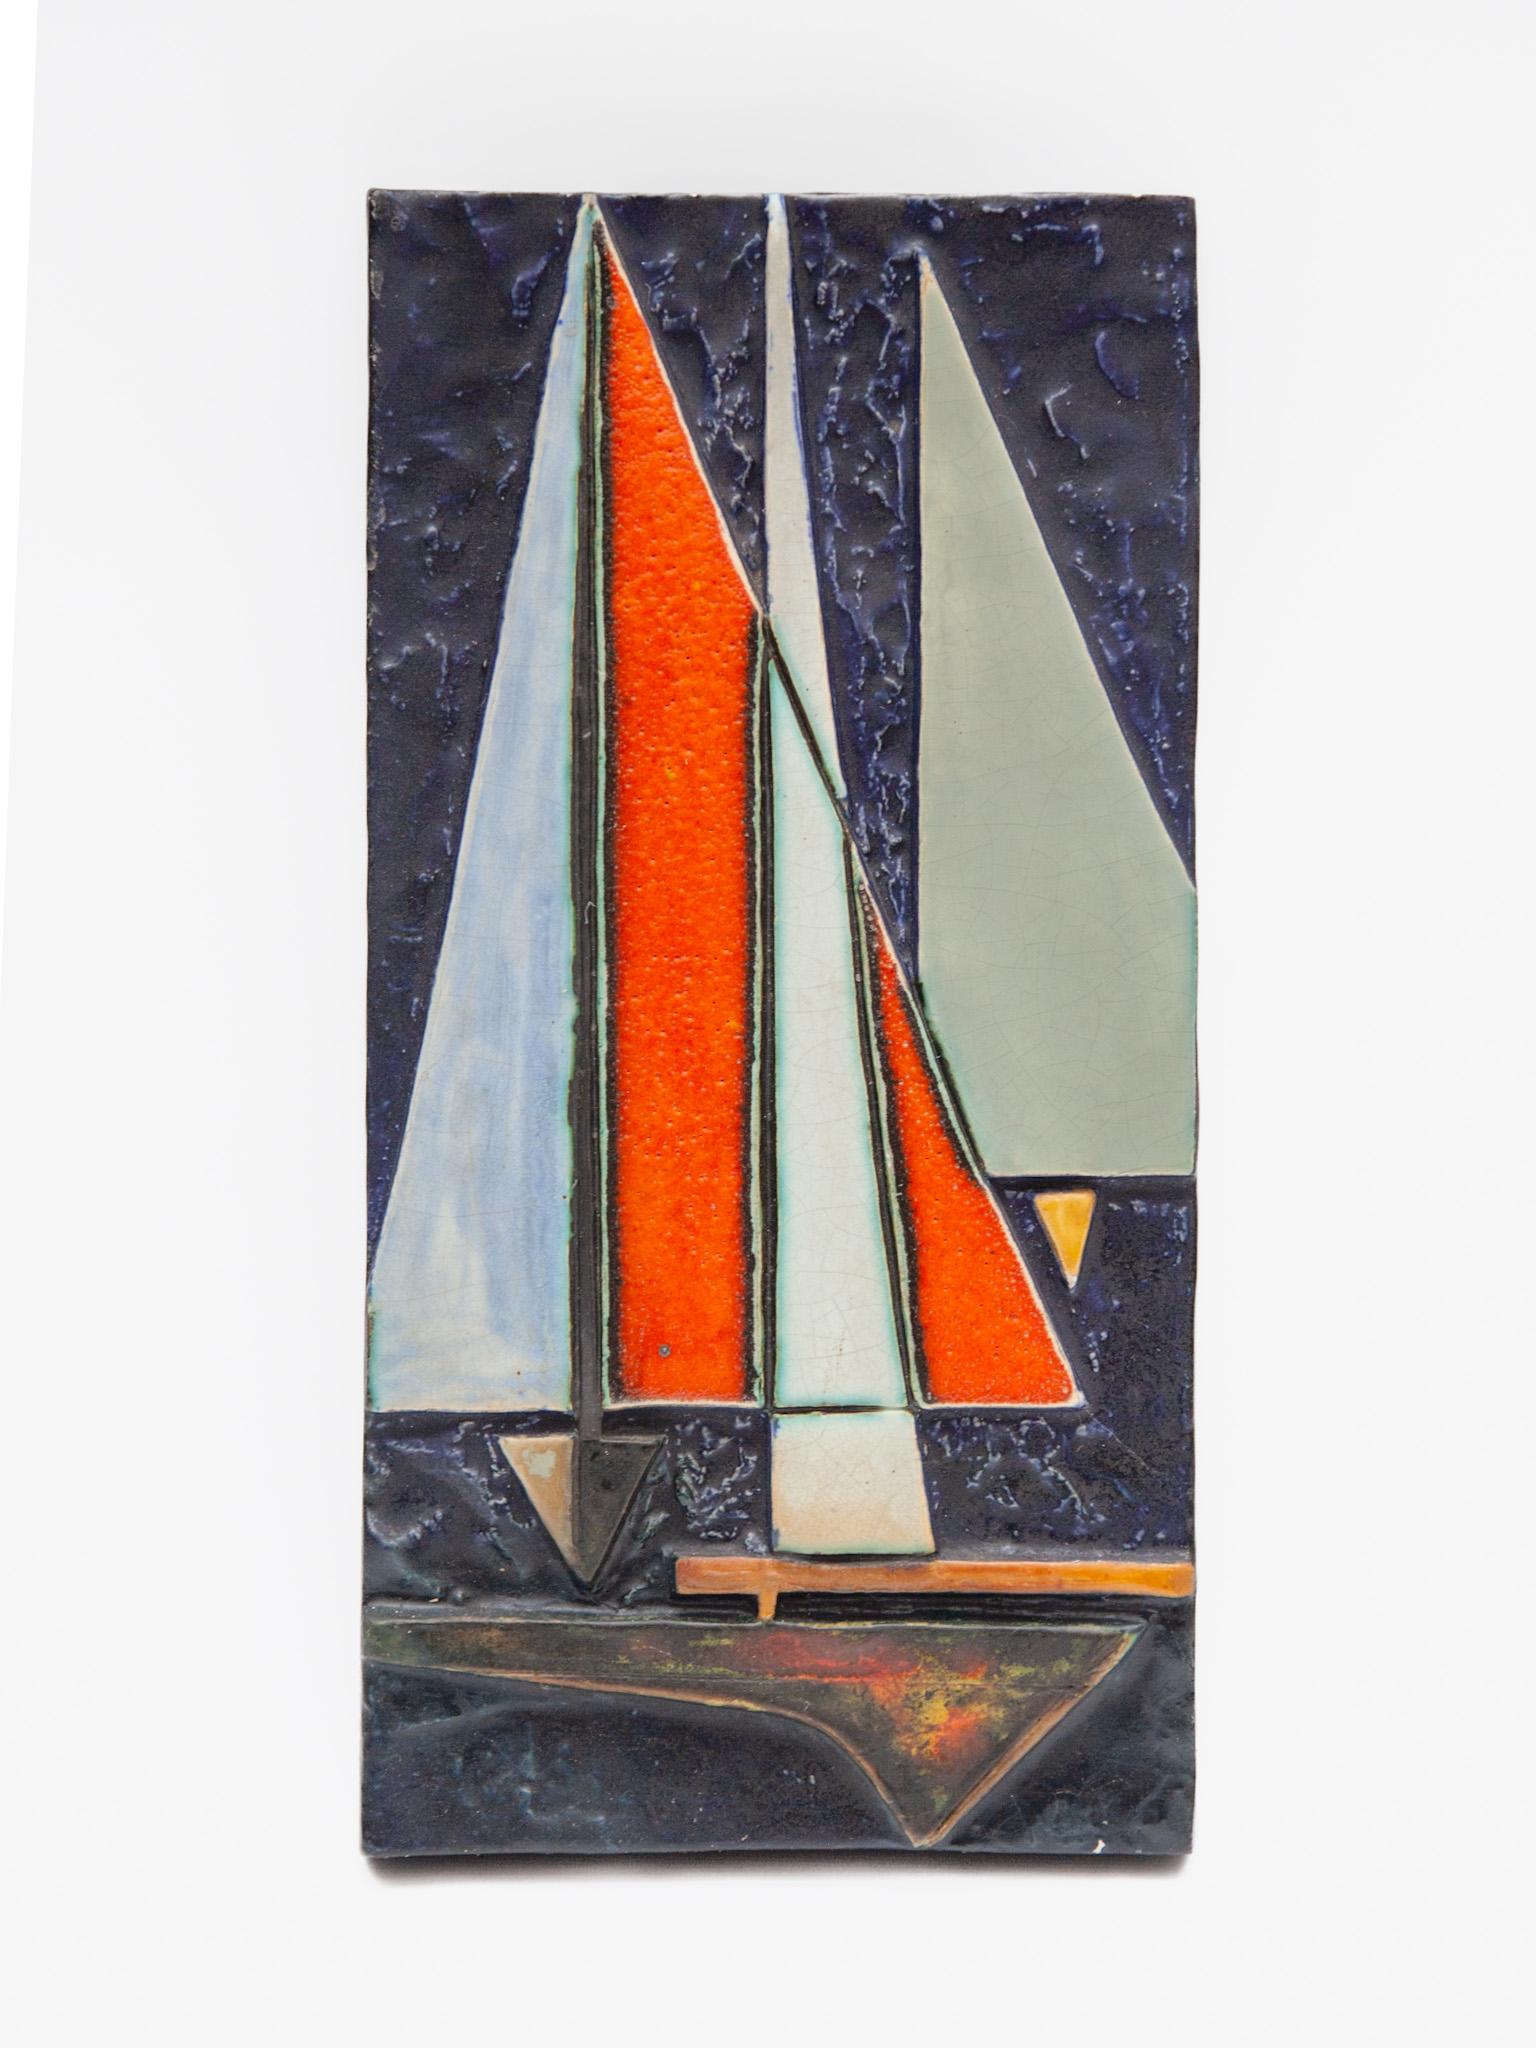 Large ceramic wall tile designed by Helmut Schäffenacker made in Germany abstract decor of a sailing ship hand painted in beautiful expressive colors of blue and orange, thick, irregular glossy glaze made in chamotte clay, ready for safe wall